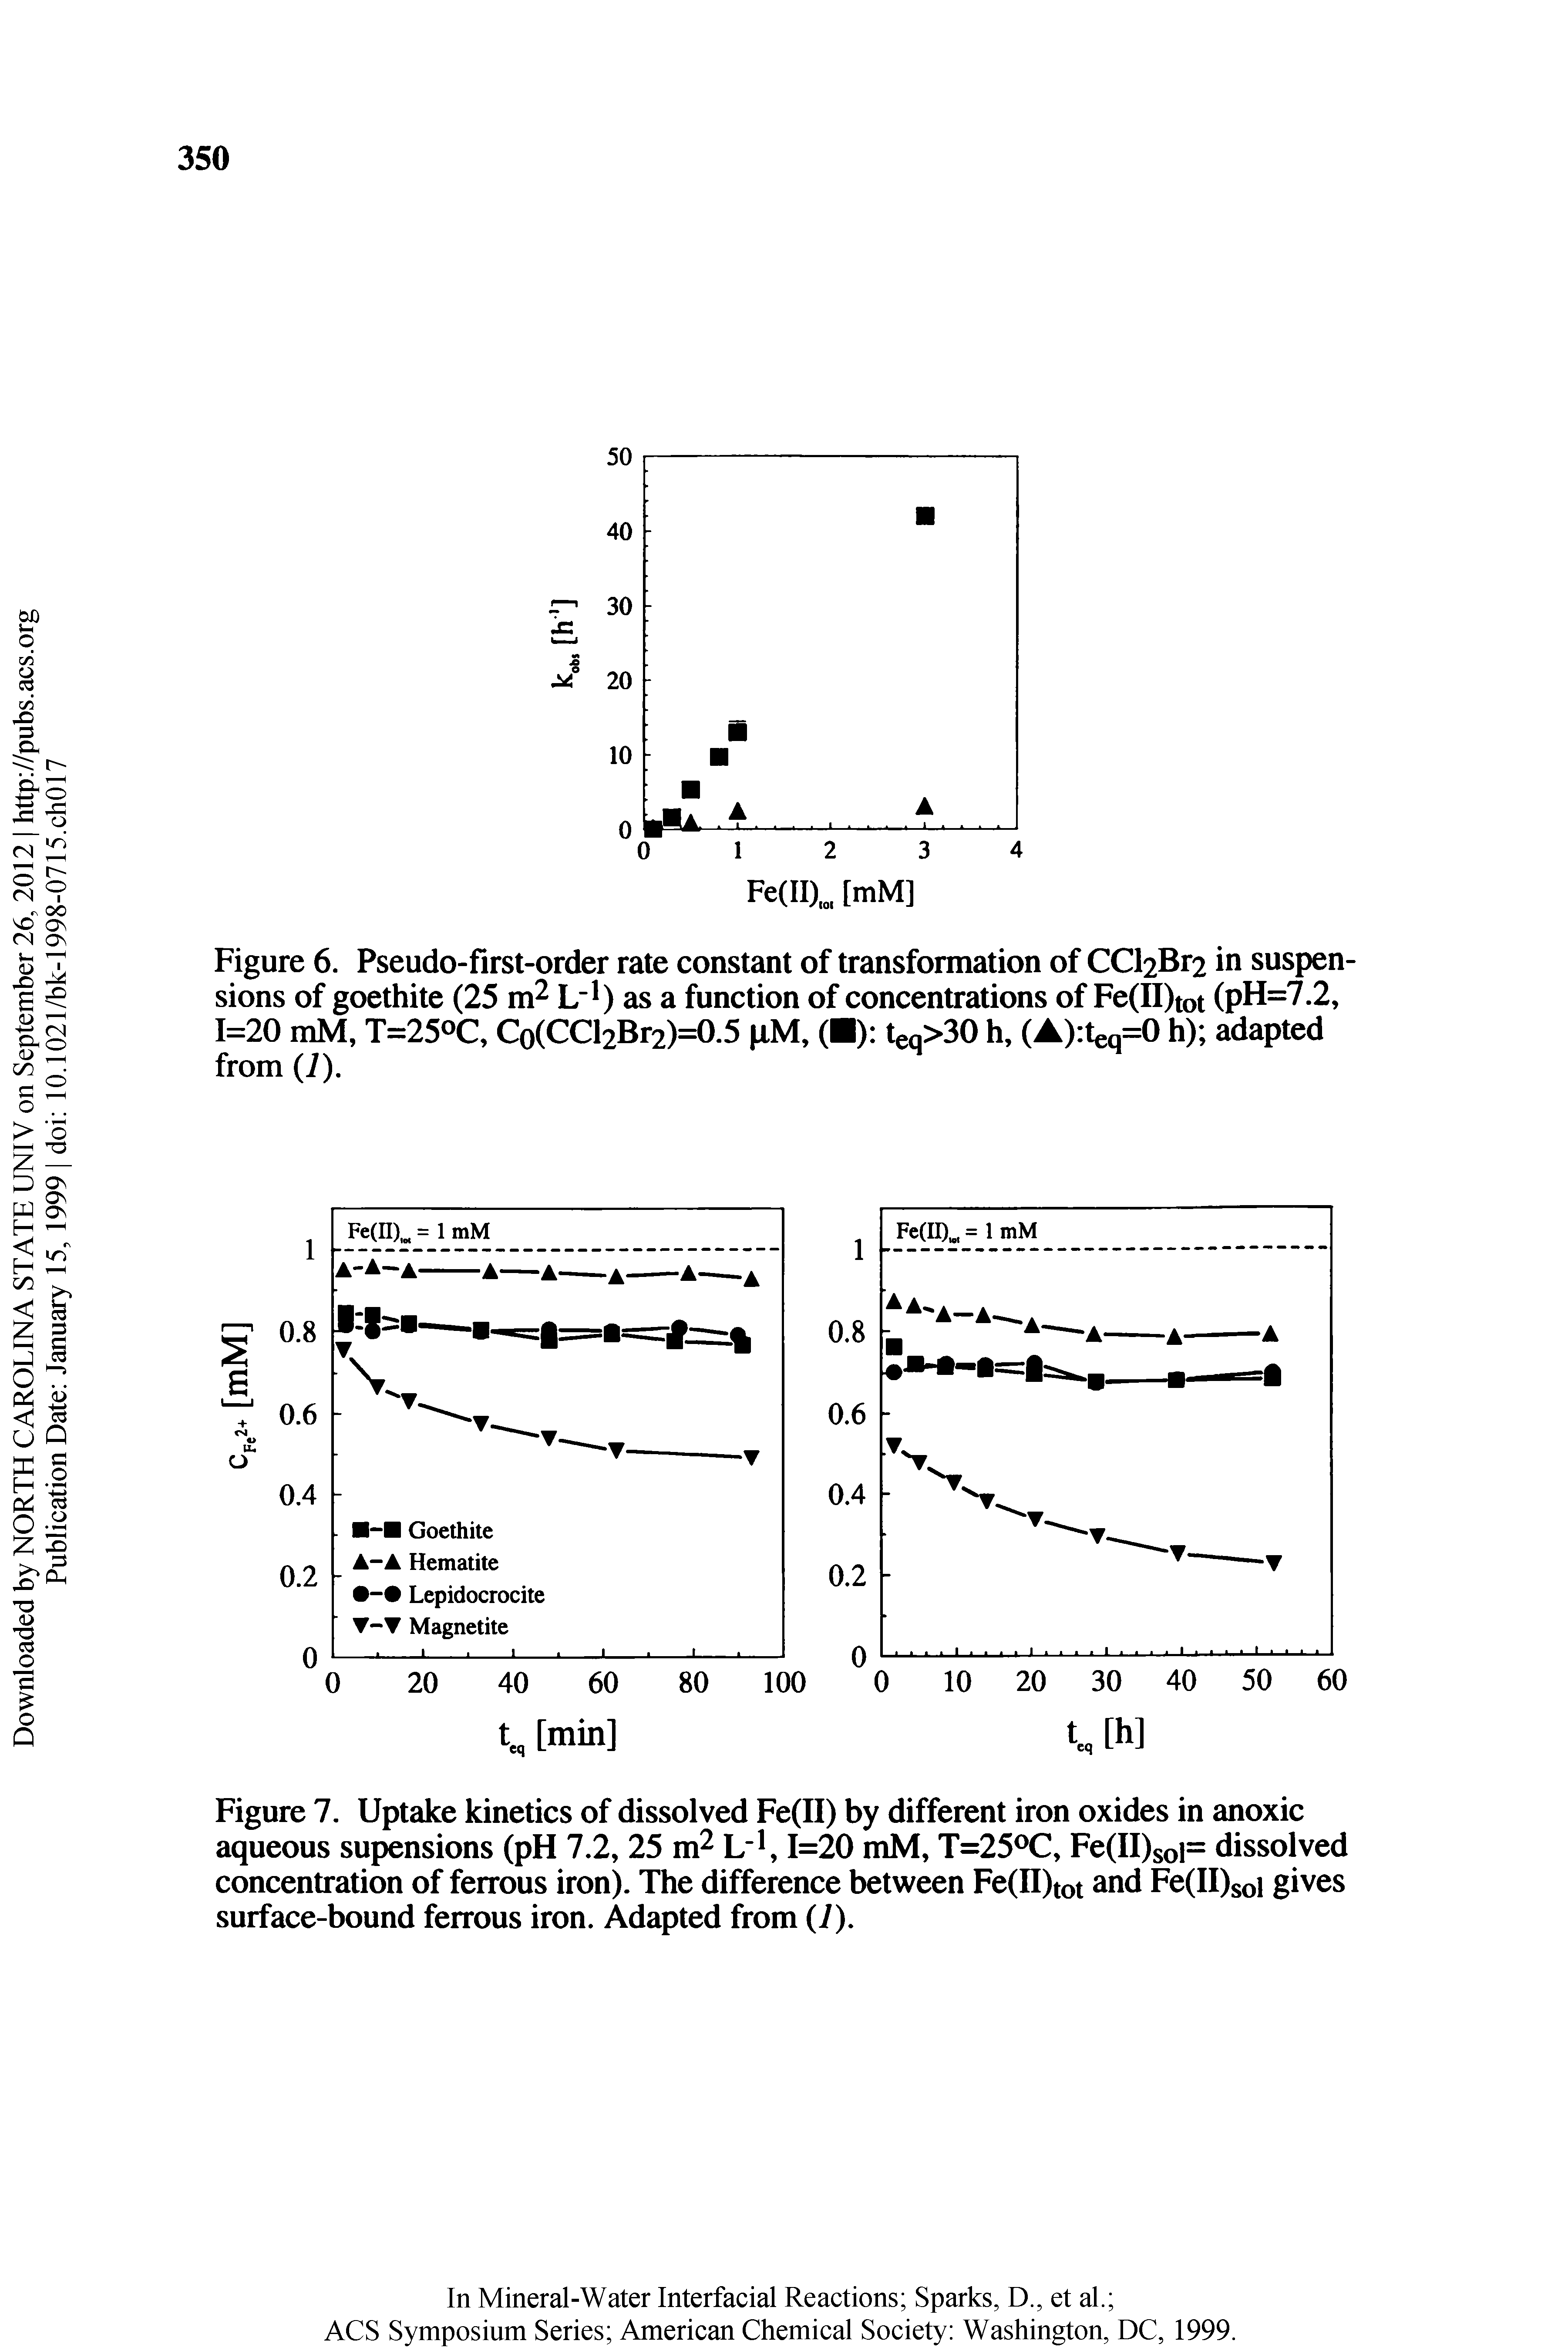 Figure 7. Uptake kinetics of dissolved Fe(II) by different iron oxides in anoxic aqueous supensions (pH 7.2, 25 m L" , 1=20 mM, T=25 C, Fe(II)soi= dissolved concentration of ferrous iron). The difference between Fe(II)tot and Fe(II)sol gives surface-bound ferrous iron. Adapted from (7).